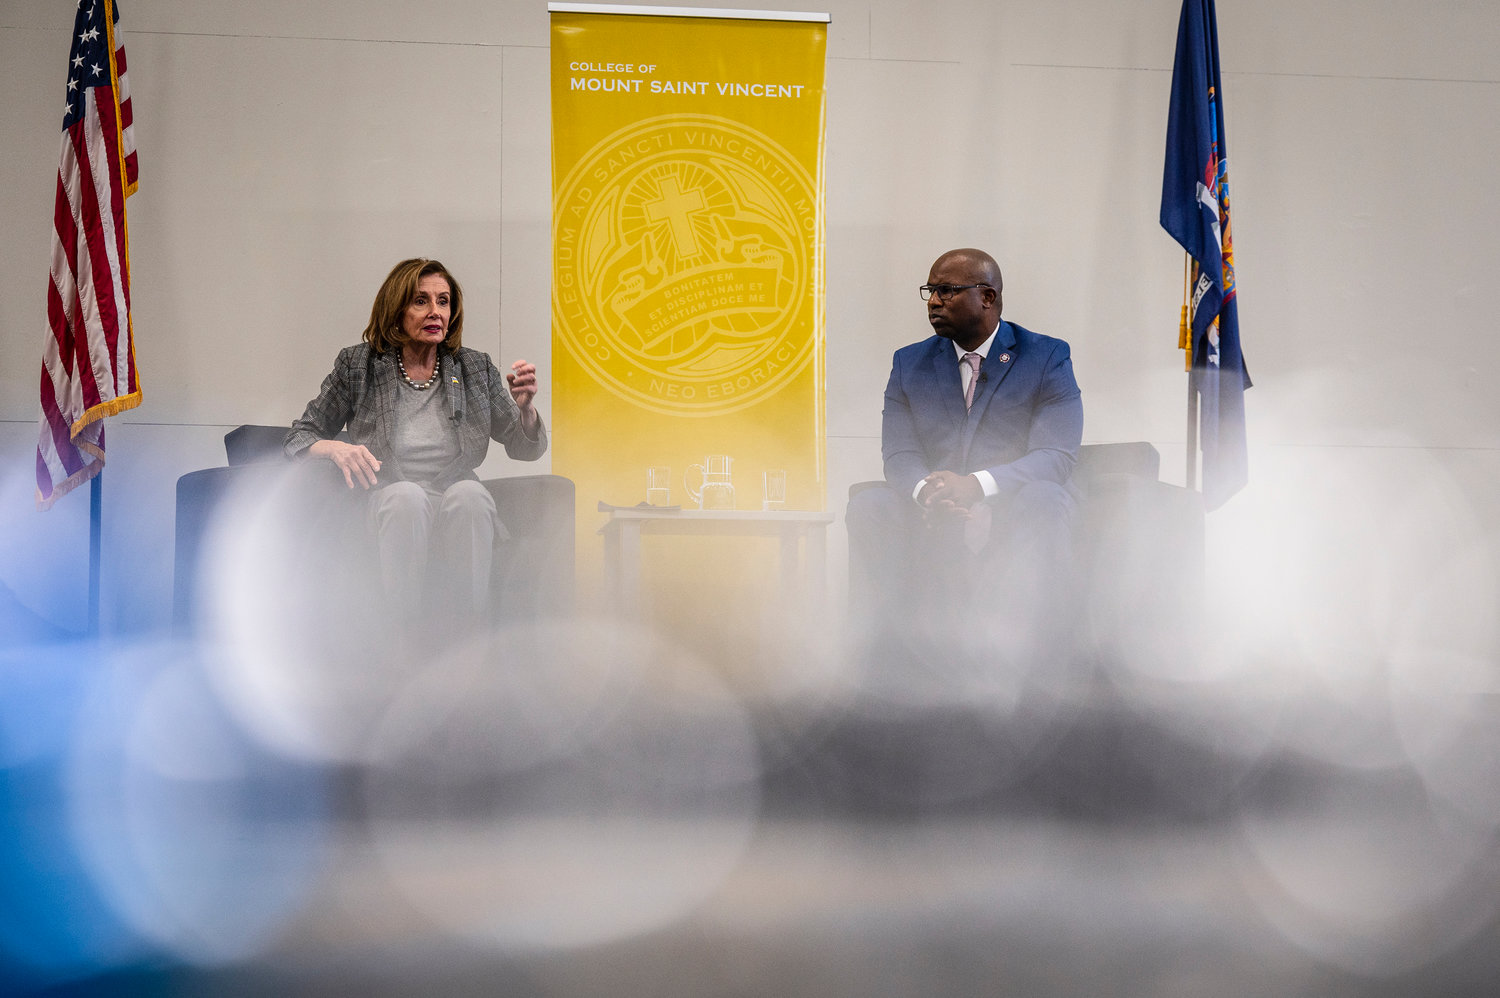 U.S. Rep. Jamaal Bowman and House Speaker Nancy Pelosi got together for a town hall meeting this past Monday at the College of Mount Saint Vincent. Donning a Ukrainian-flag lapel pin, Pelosi.